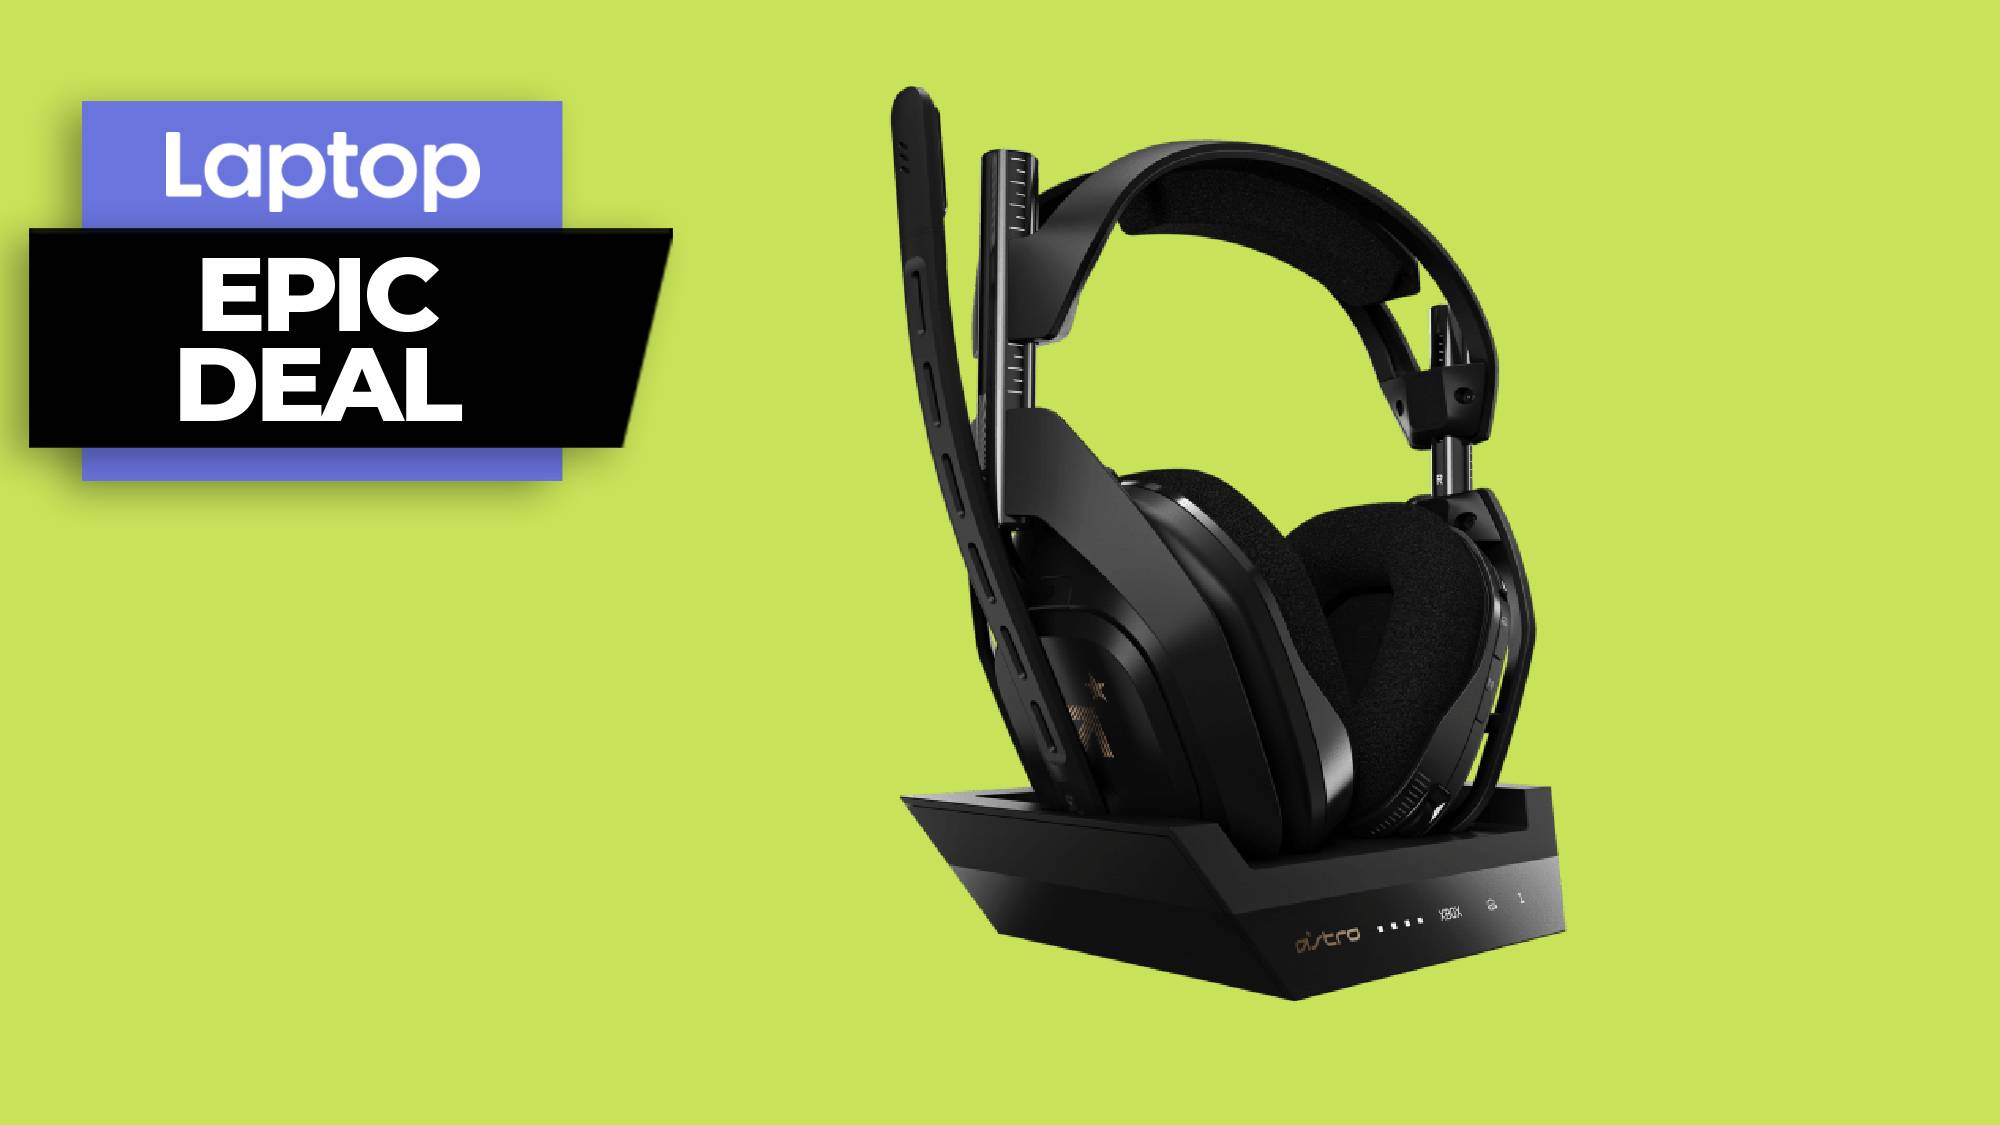 Astro A50 wireless headset with base station is the best gift for gamers save $45 now | Laptop